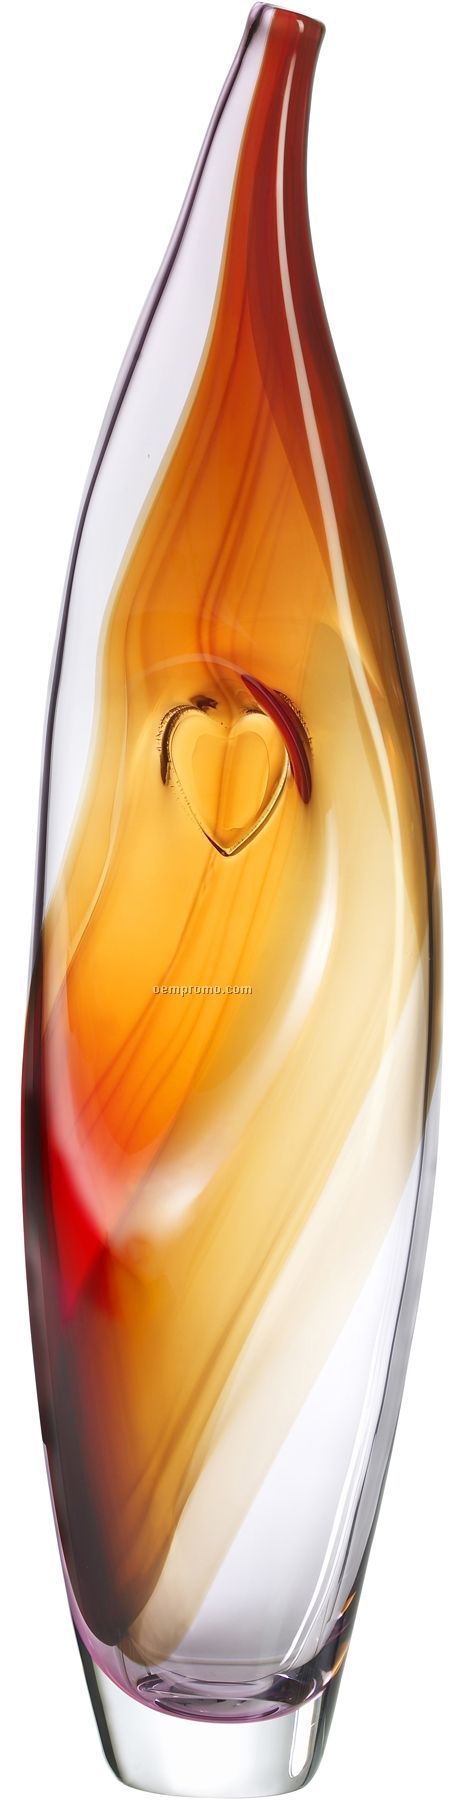 Bali Tall Glass Vase With Heart Inset By Kjell Engman